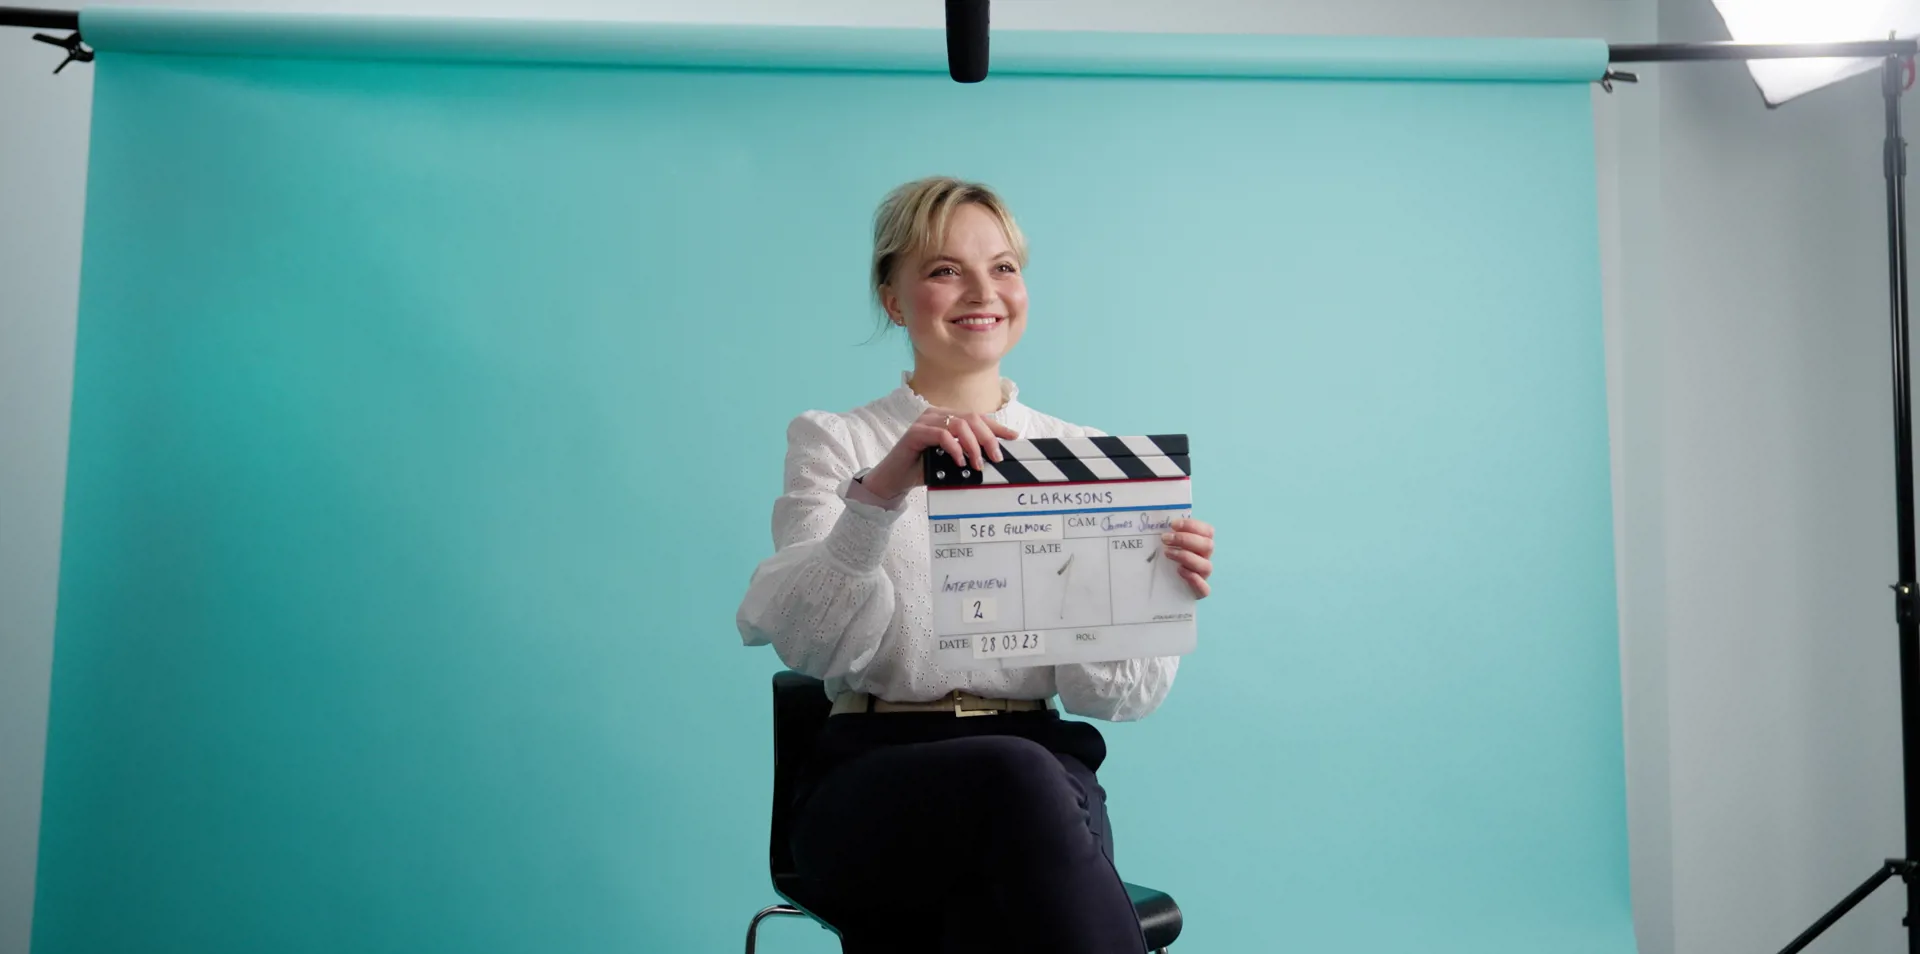 woman sitting on a stool behind a blue background, holding a clapper